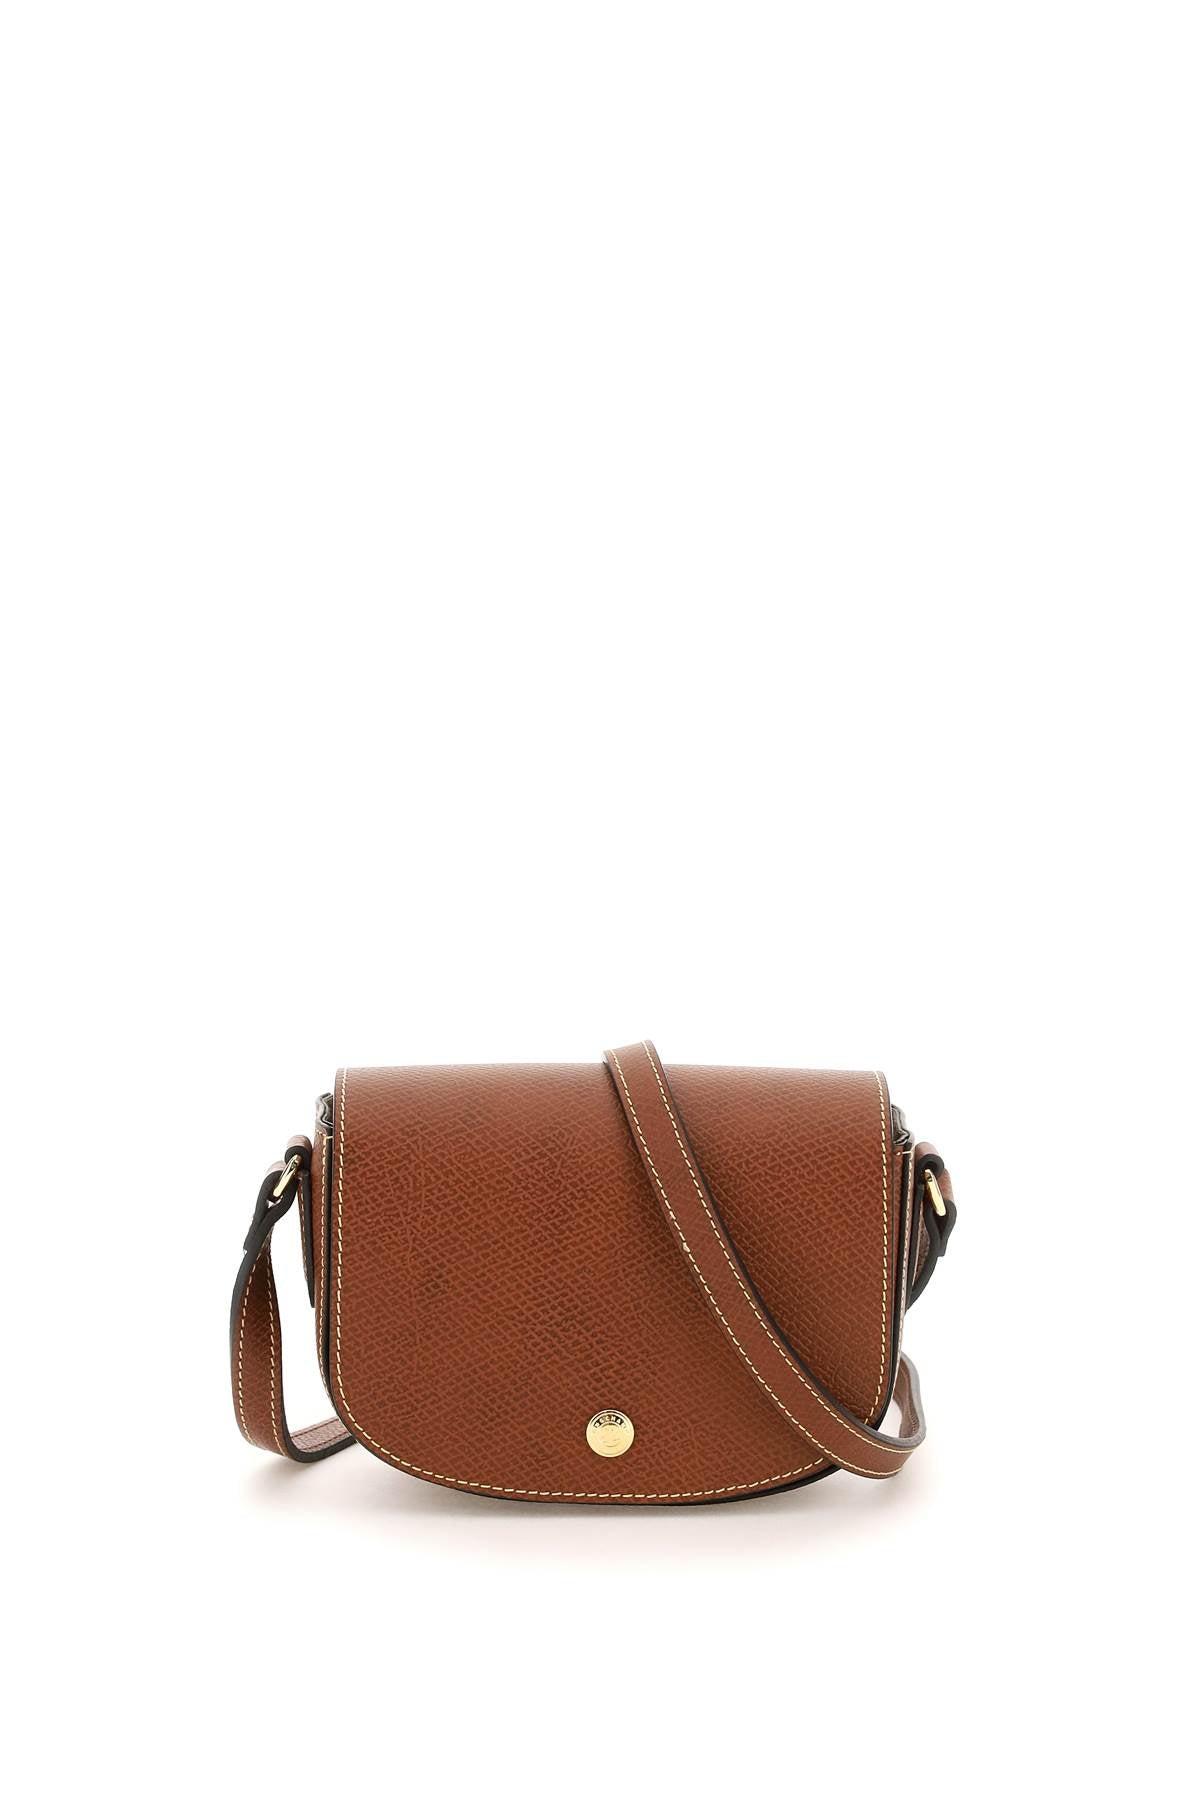 Longchamp Épure Grained Leather Mini Bag in Brown | Lyst